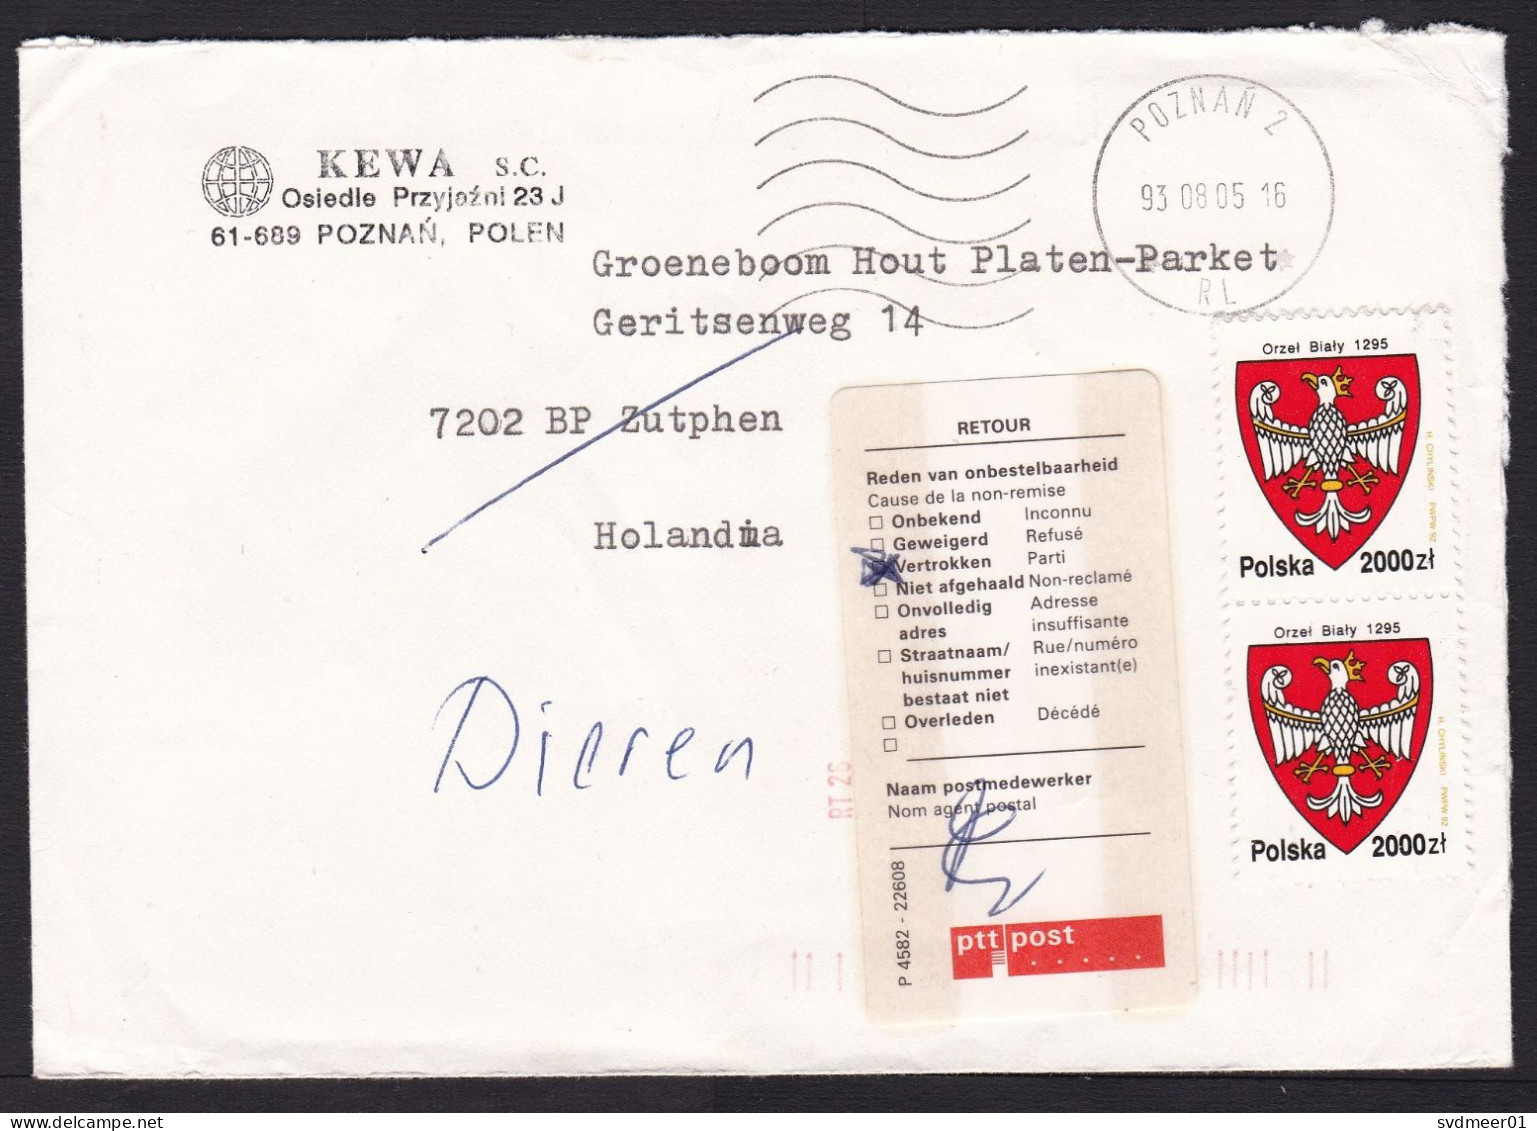 Poland: Cover To Netherlands, 1993, 2 Stamps, Heraldry, Inflation: 4000 ZL, Returned, Retour Label (minor Damage) - Covers & Documents